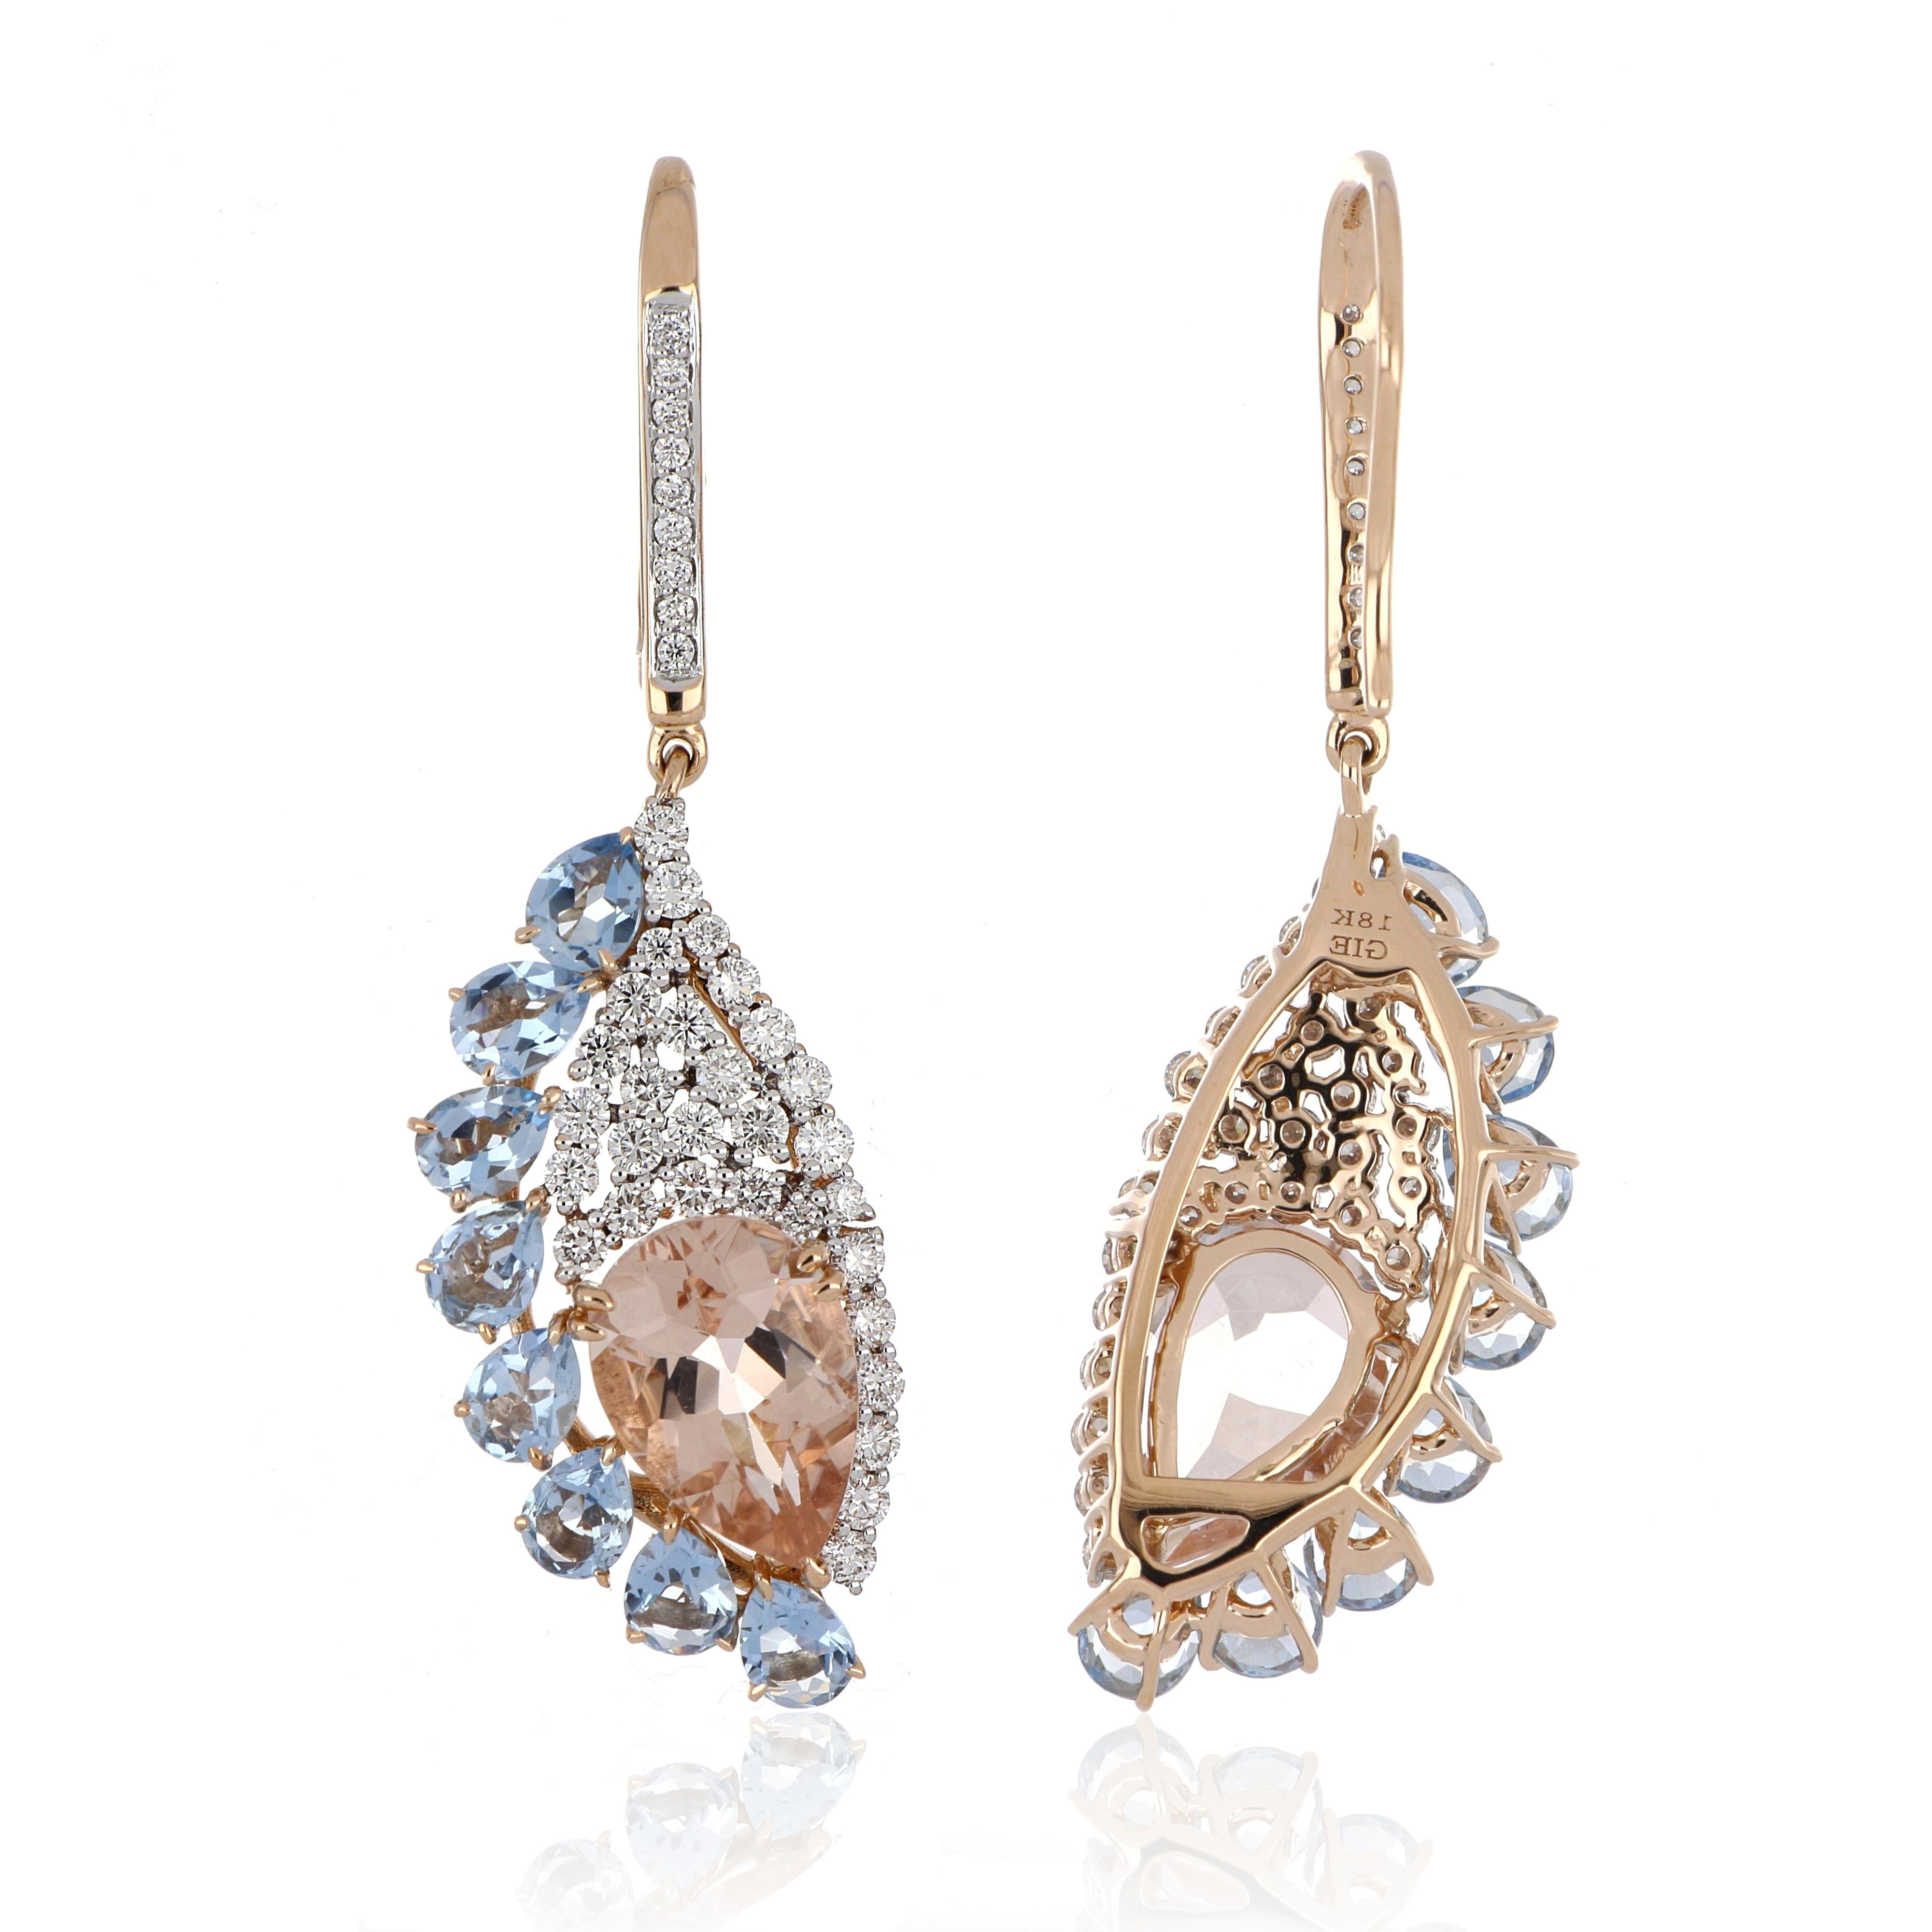 Elegant and Exquisitely detailed Gold Earrings, set with 3.46 Ct Pear Cut Morganites surrounded by 1.89 Cts (total) Pear Cut Aquamarine, accented with micro pave Diamonds, weighing approx. 0.86 Cts. total carat weight. Beautifully Hand crafted in 18